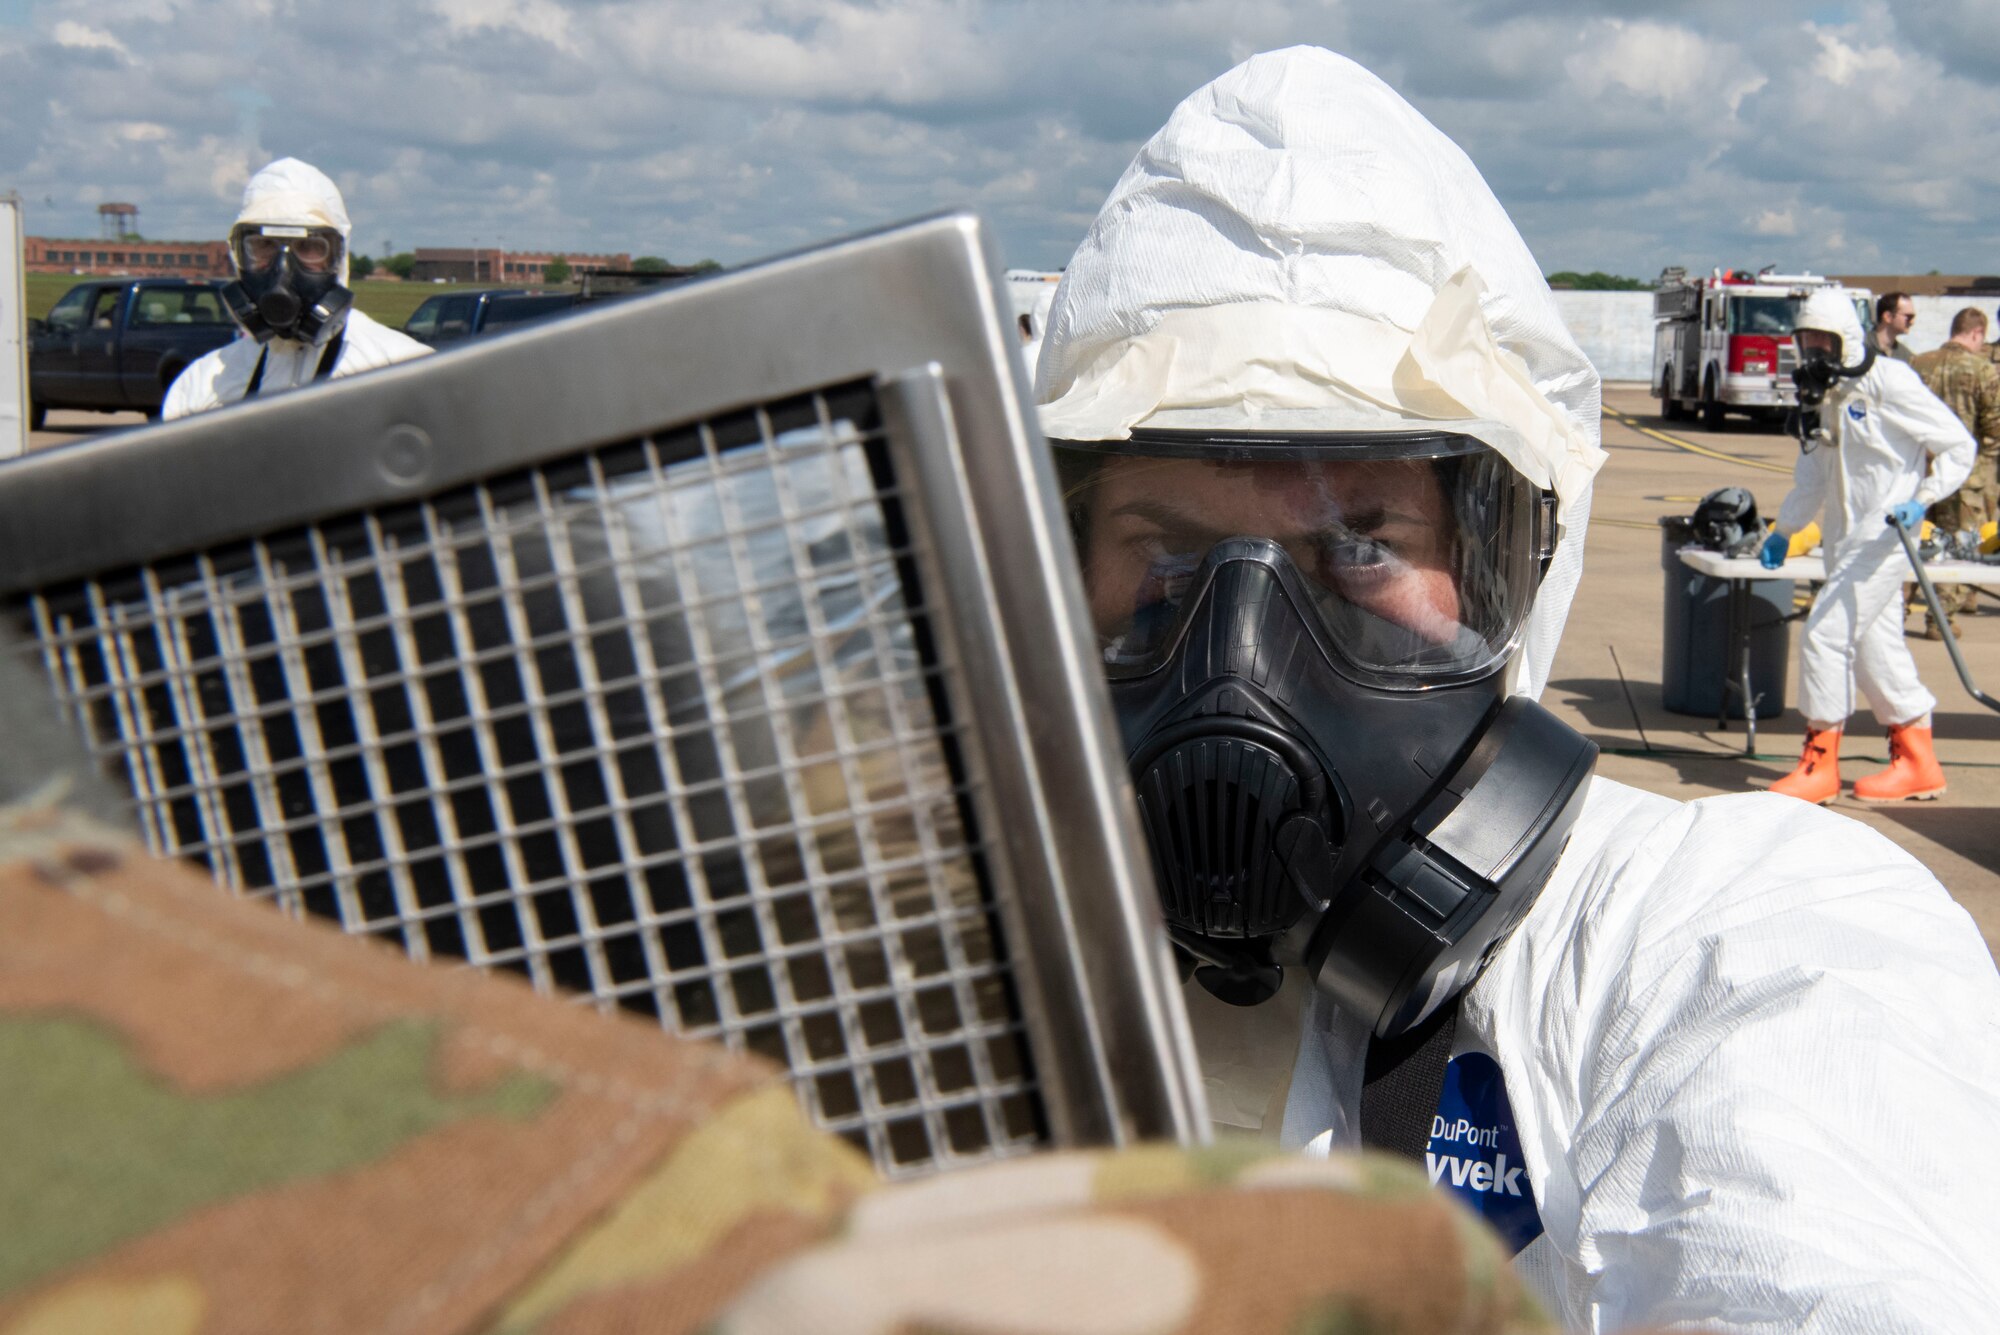 U.S. Air Force Airman 1st Class Miranda Dickinson, 100th Civil Engineer Squadron emergency management journeyman scans an Airman for contamination during an Aircraft Radiological Recovery Plan training event at Royal Air Force Mildenhall, England, May 11, 2023. The WC-135 Constant Phoenix aircraft is currently the only aircraft in the Air Force inventory that conducts air sampling operations. The ability to evaluate radionuclides in the atmosphere enhances the Air Force Technical Applications Center’s ability to monitor Limited Test Ban Treaty of 1963 compliance. (U.S. Air Force photo by Tech. Sgt. Anthony Hetlage)